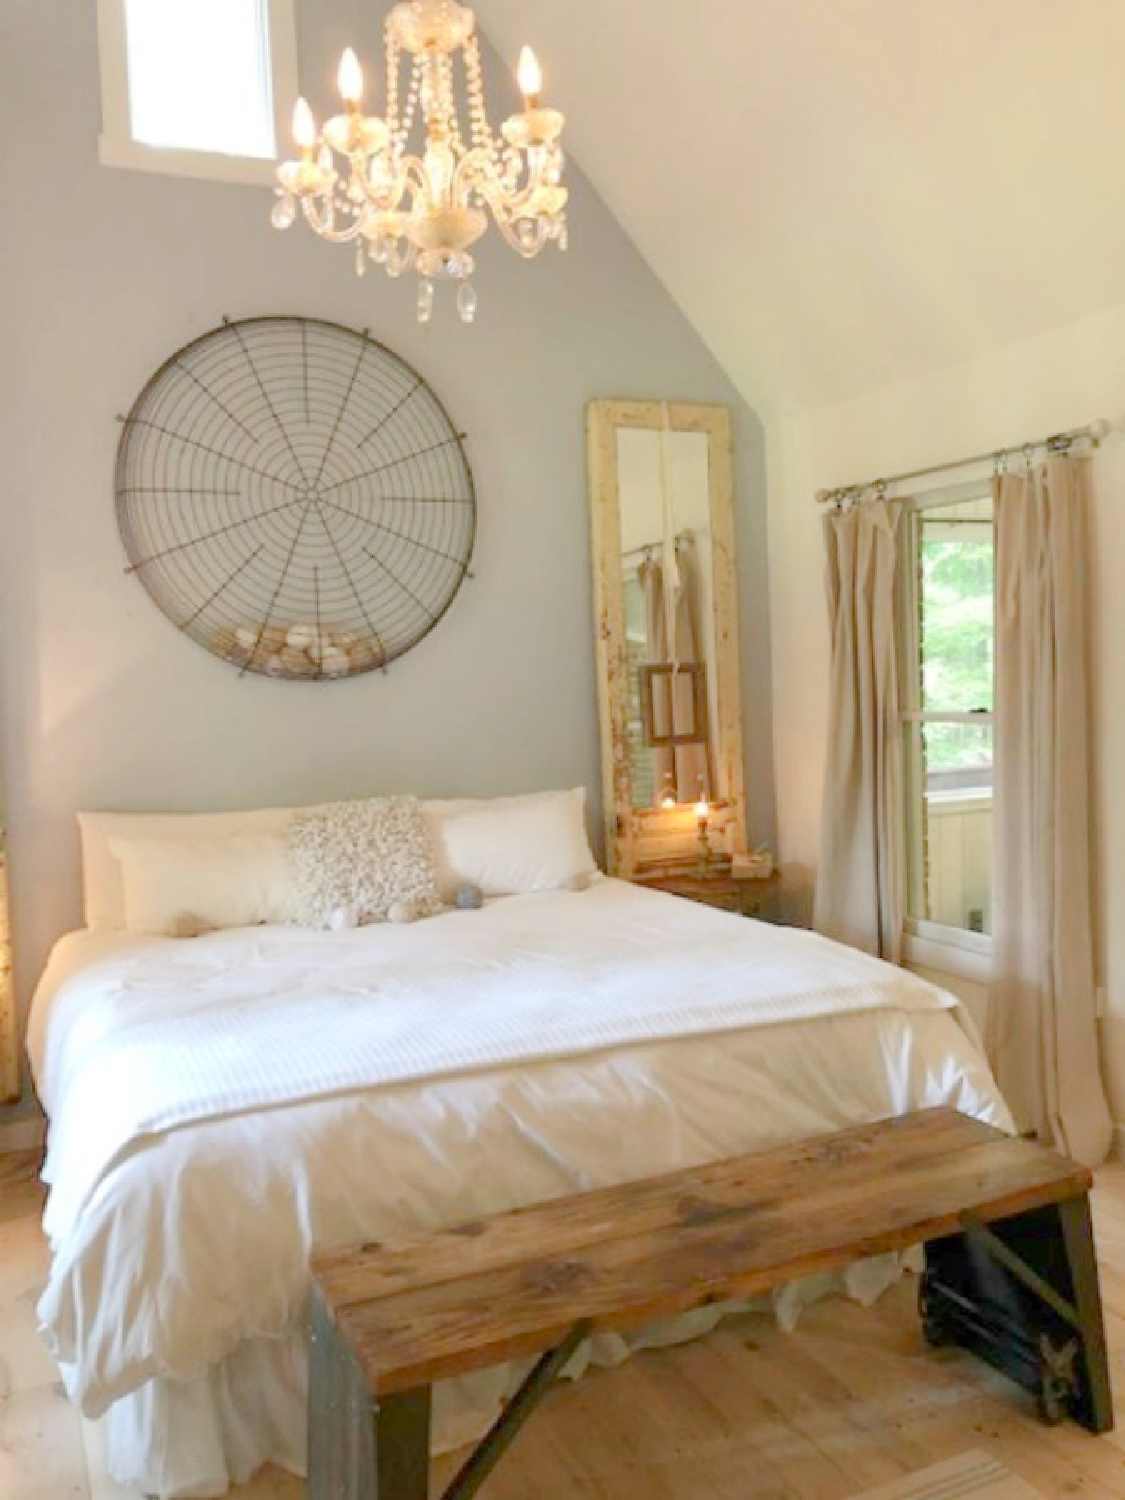 Bedroom with vintage furniture and decor in rustic country cottage in Leiper's Fork, TN known as storybook cottage - Hello Lovely Studio.